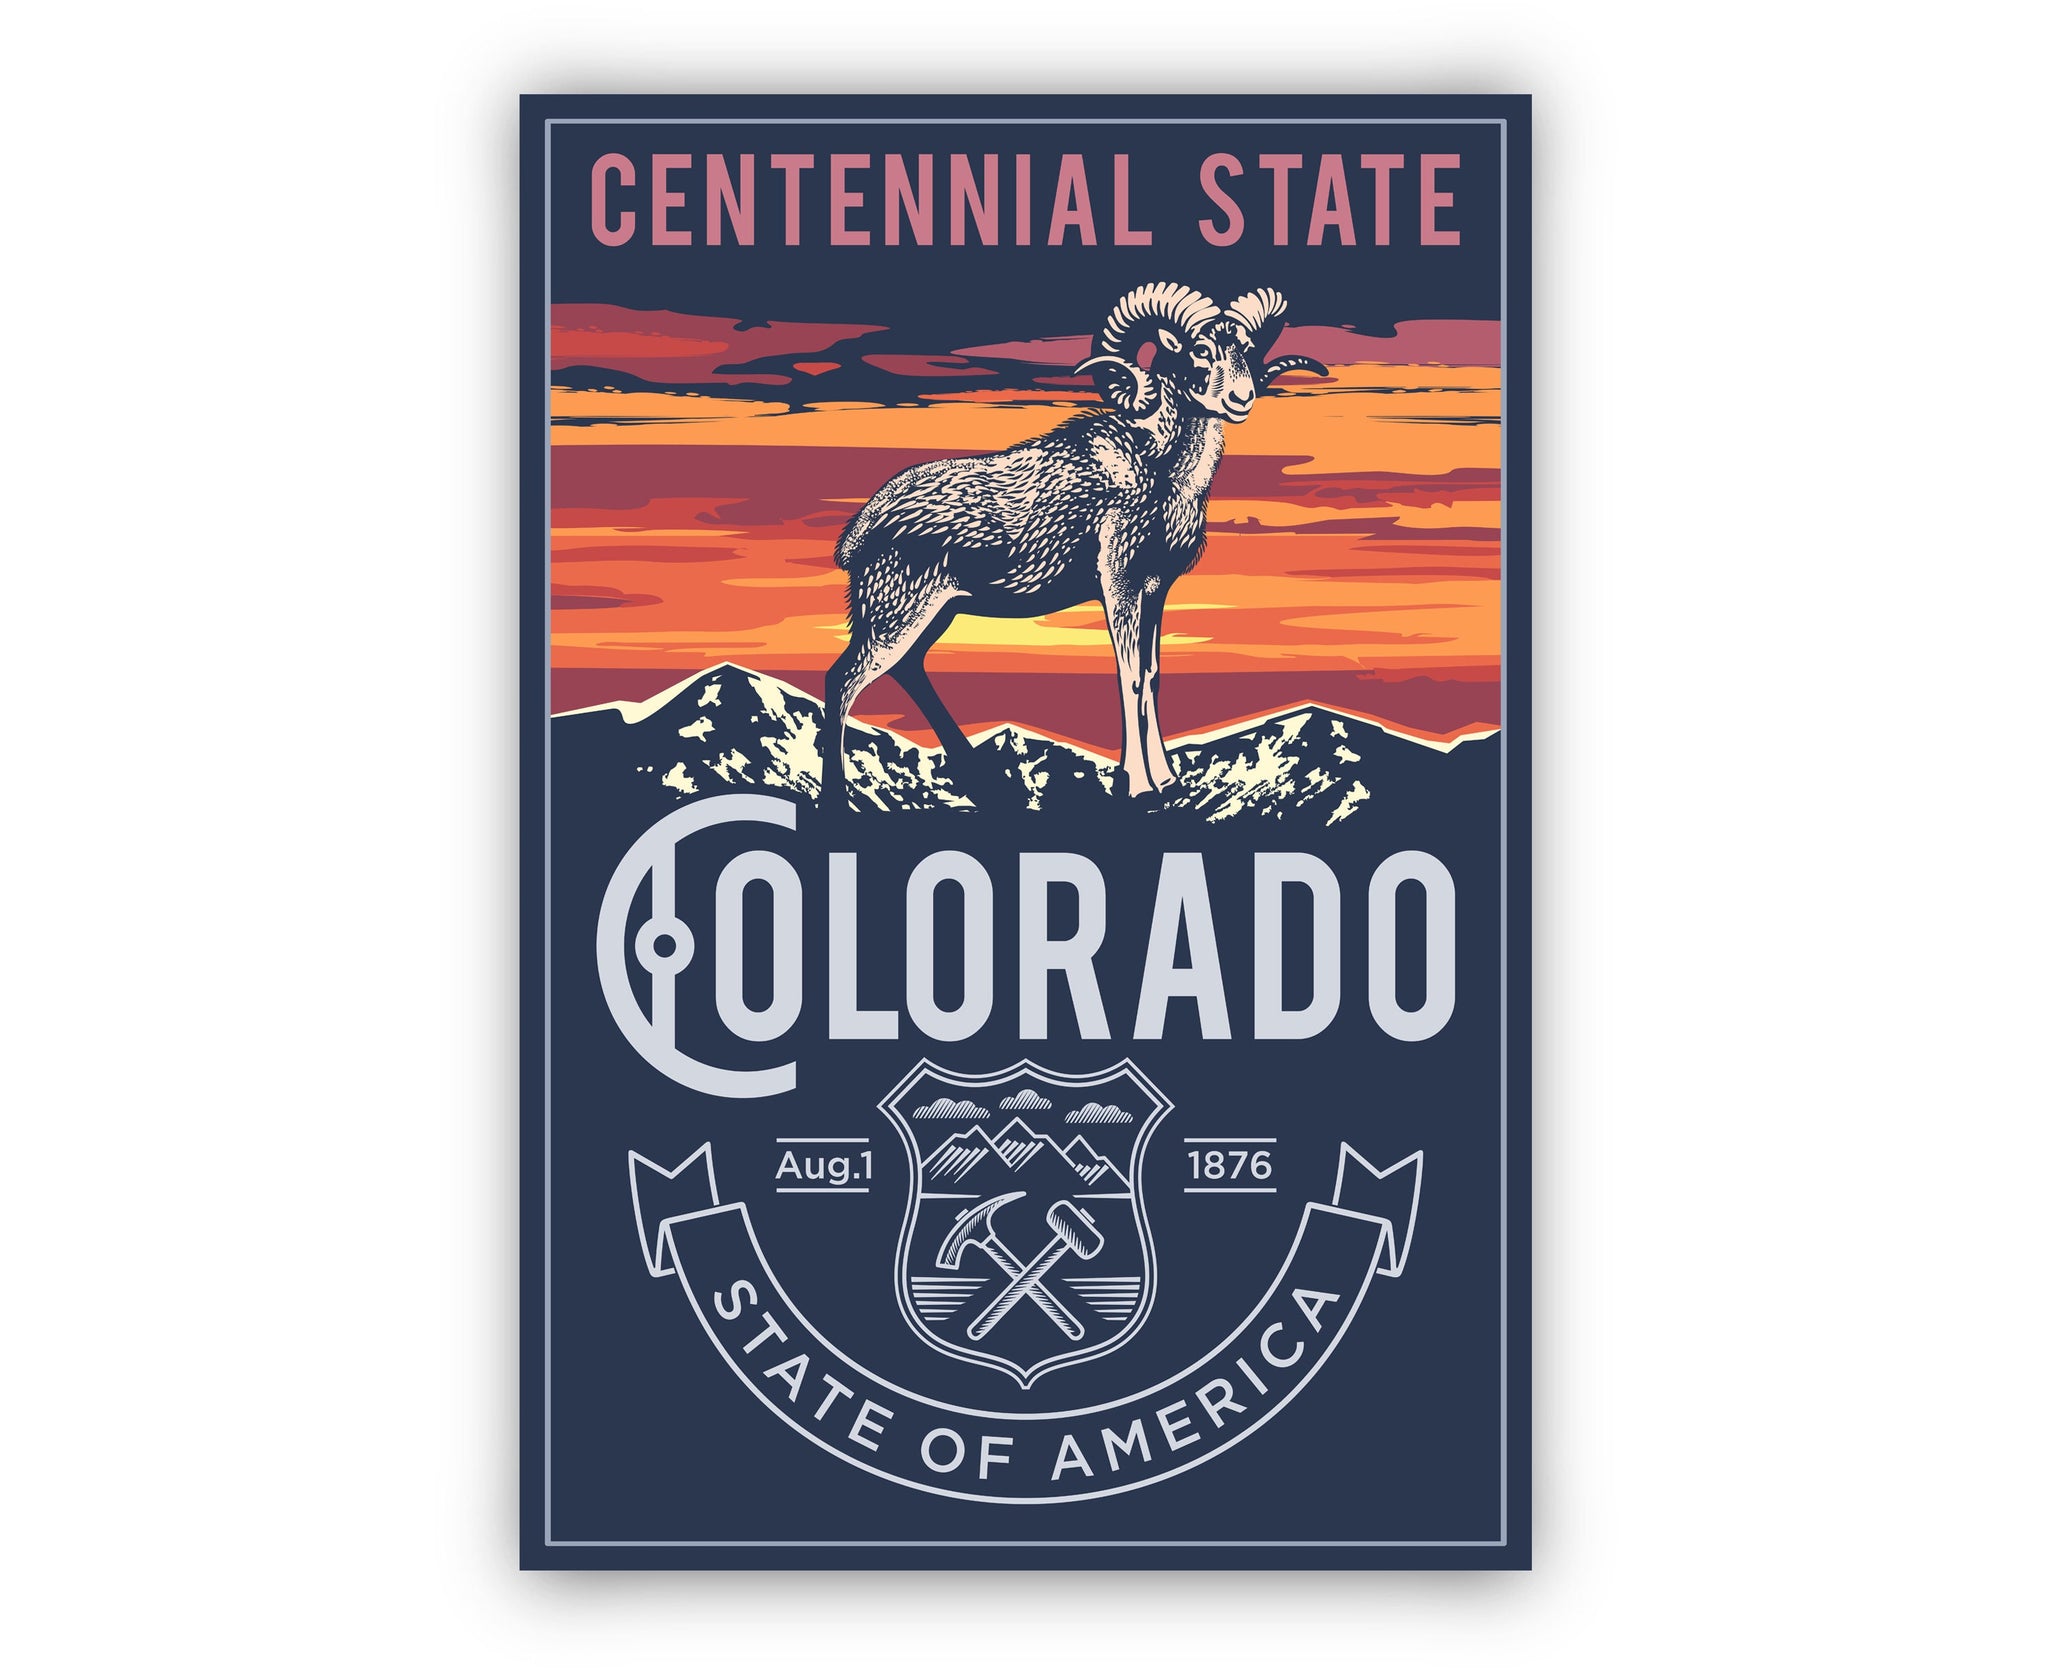 United States Colorado State Poster, Colorado Poster Print, Colorado State Emblem Poster, Retro Travel State Poster, Home, Office Wall Art